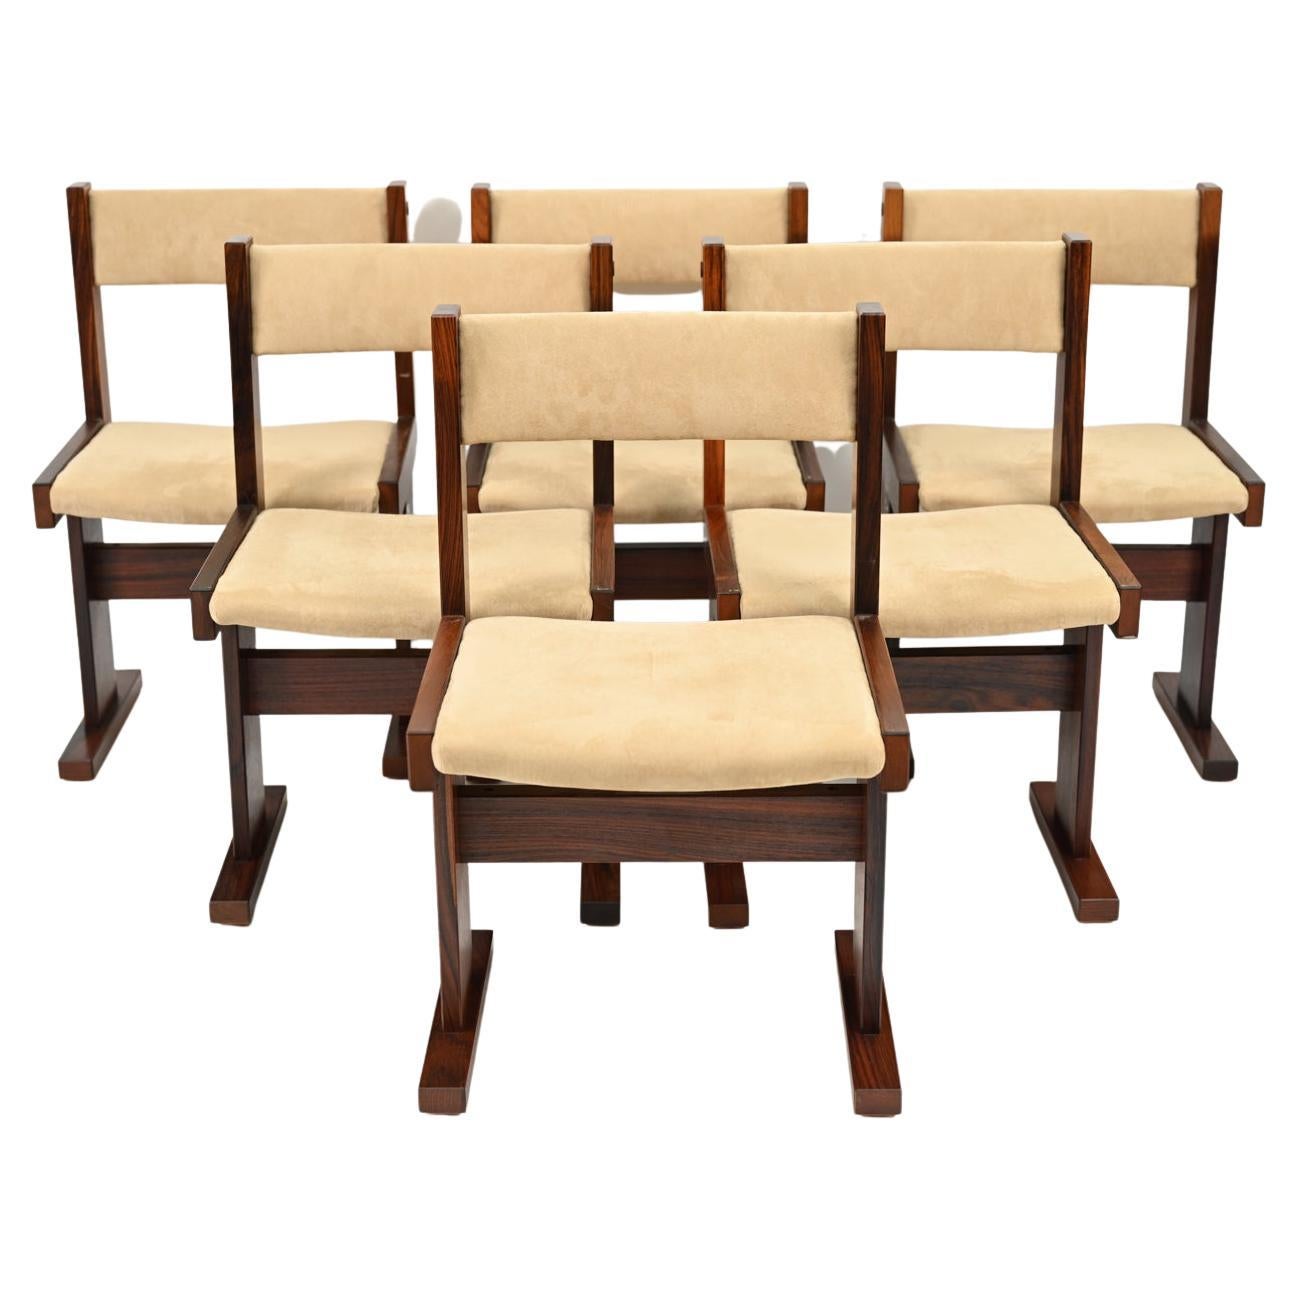 Six Poul H Poulsen for Gansgo Mobler Rosewood Dining Chairs